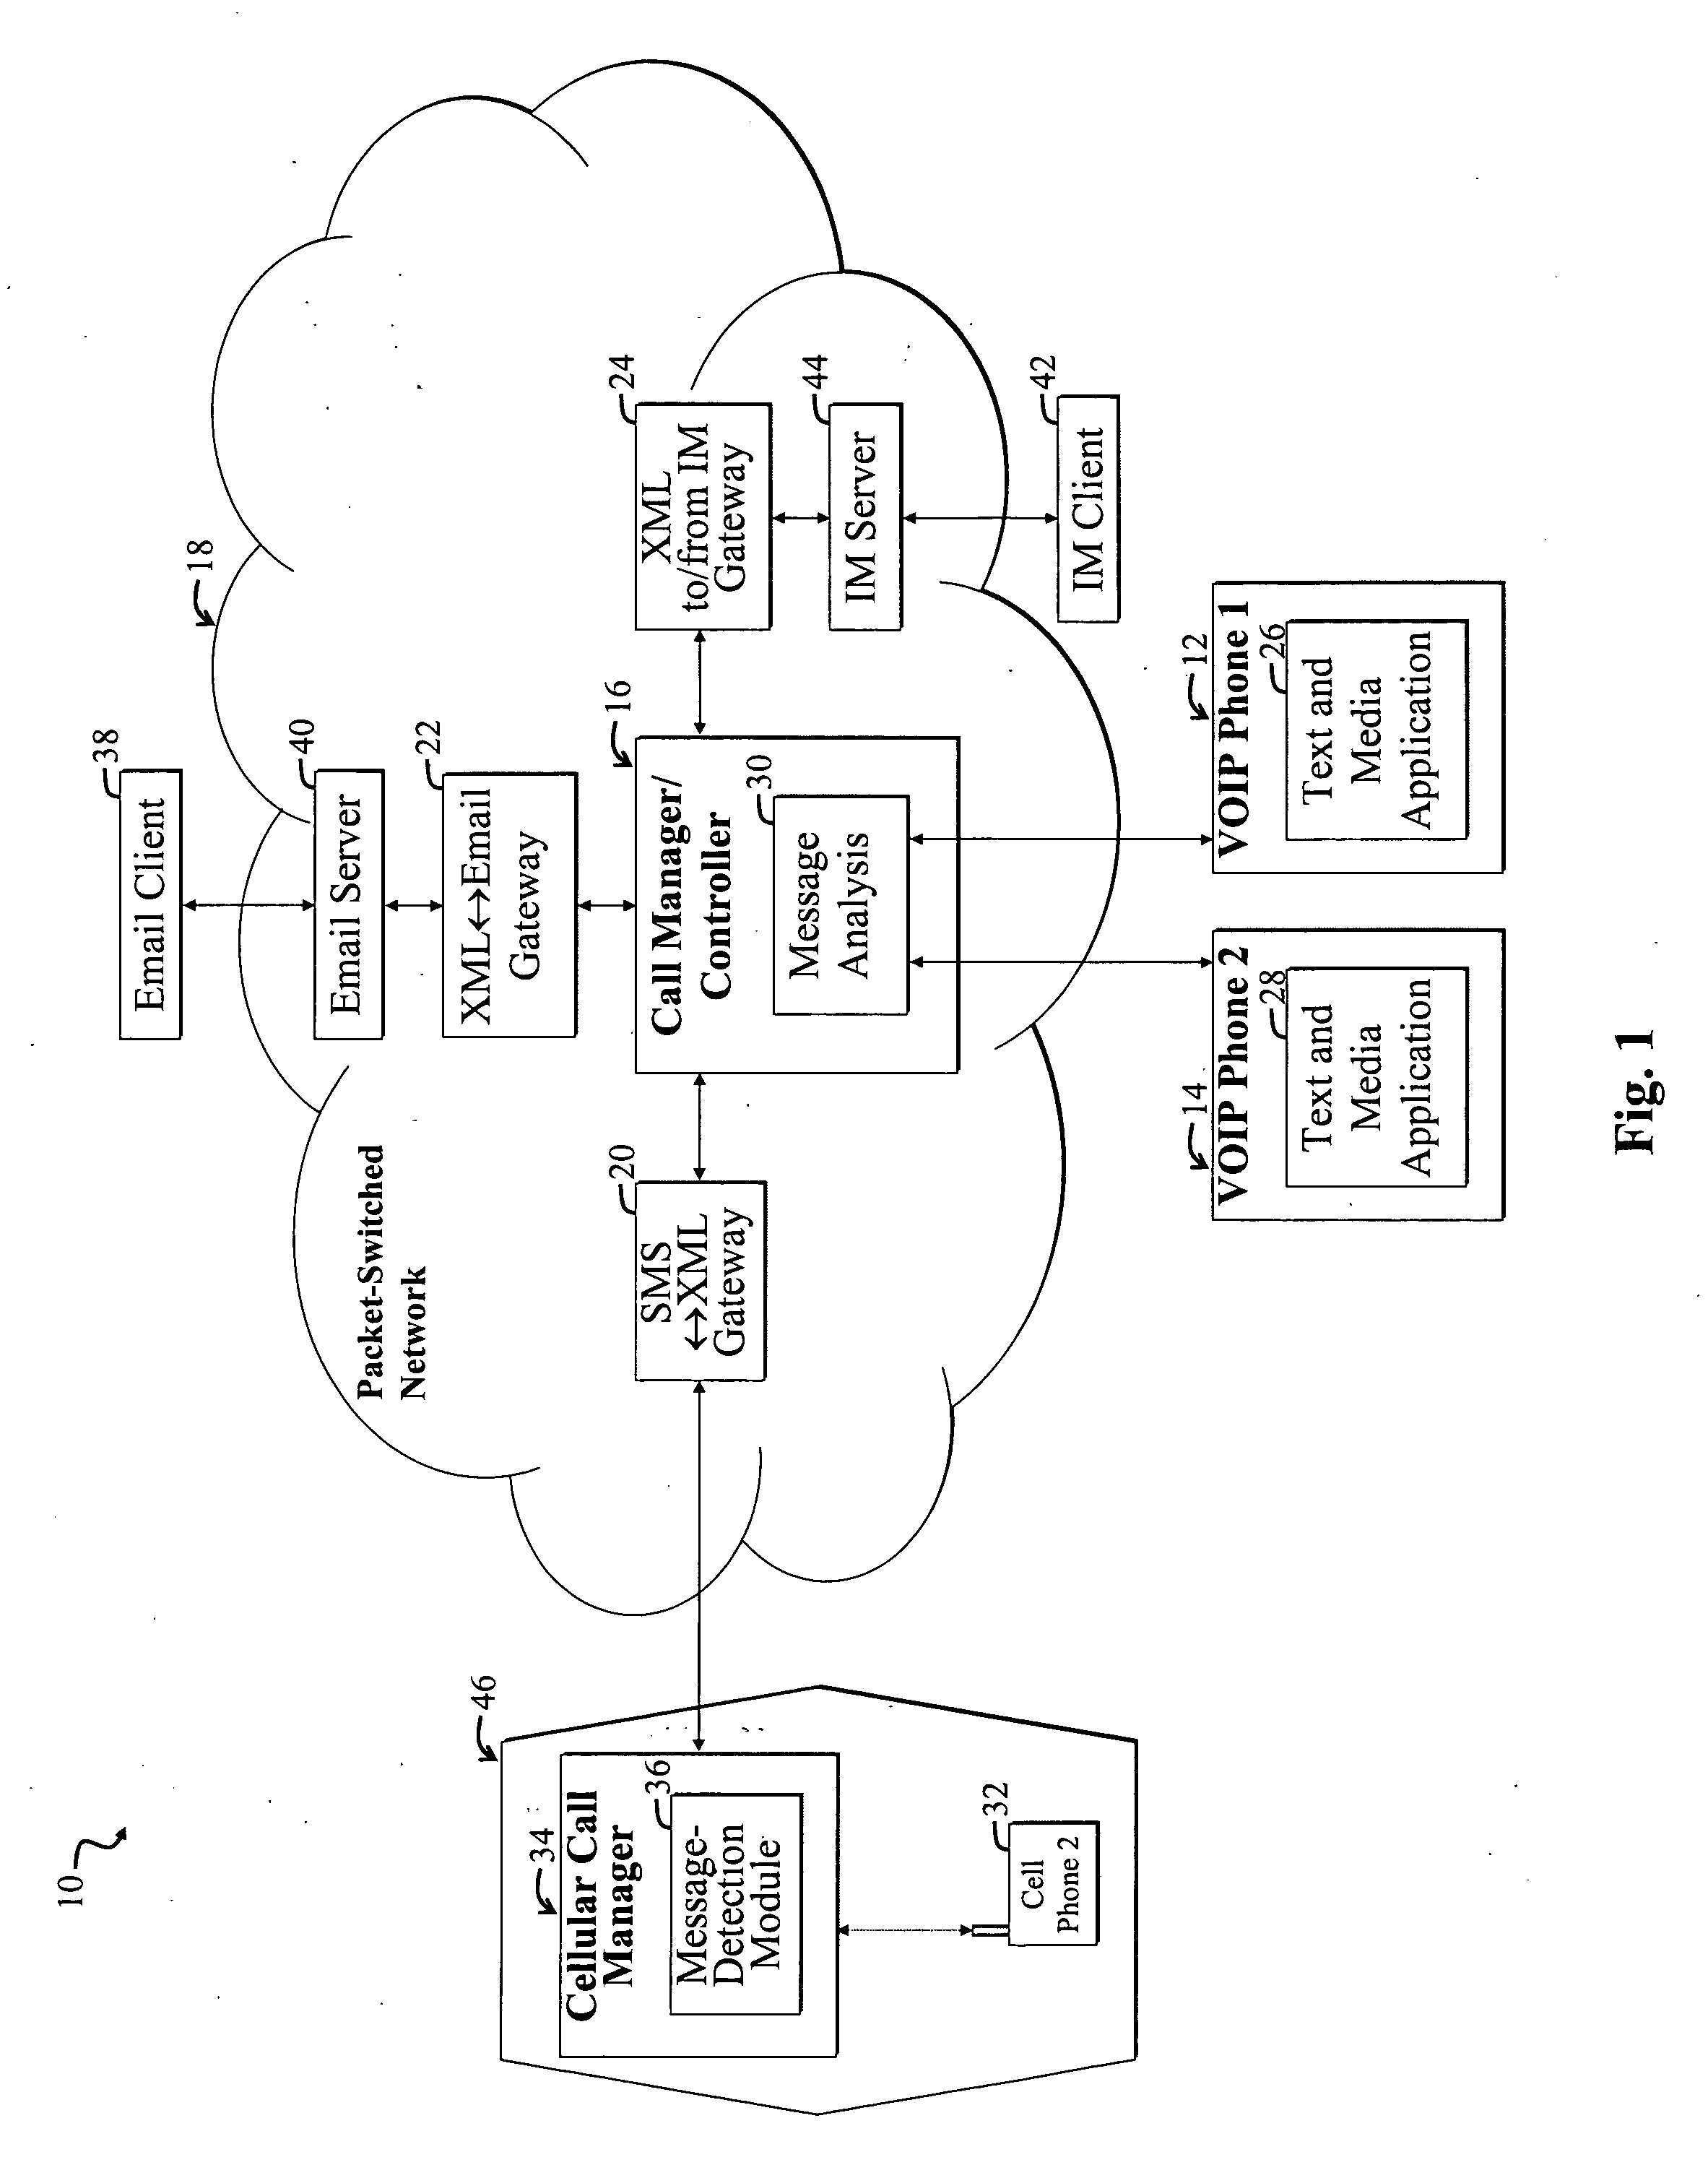 System and method for selectively interfacing different types of network communications